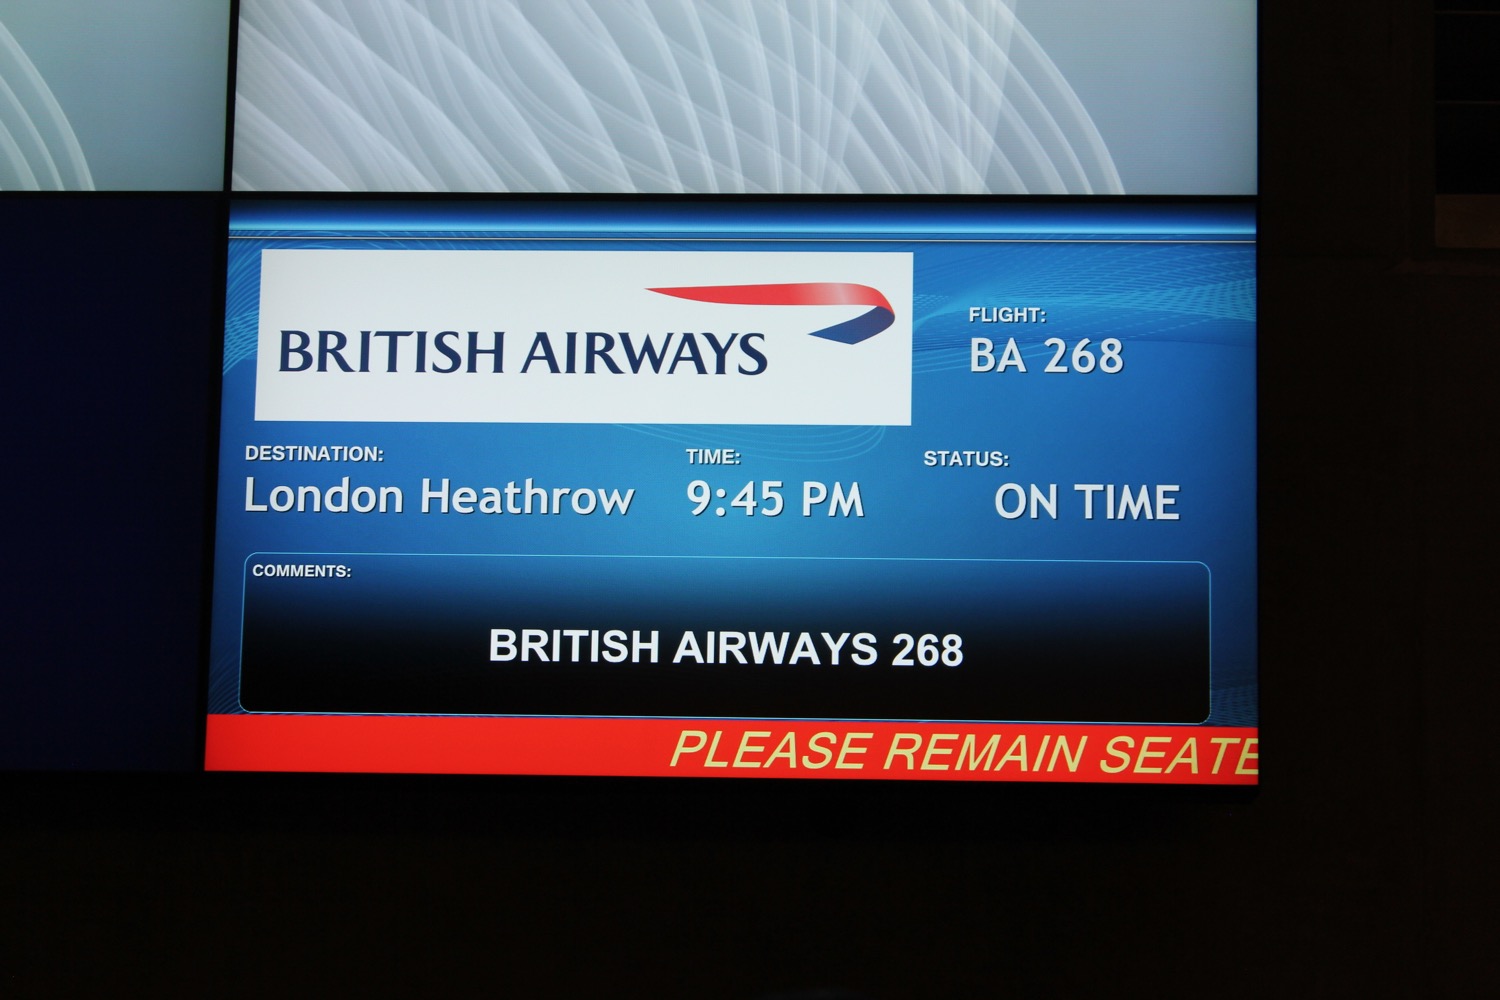 British Airways A380 First Class Review - 9